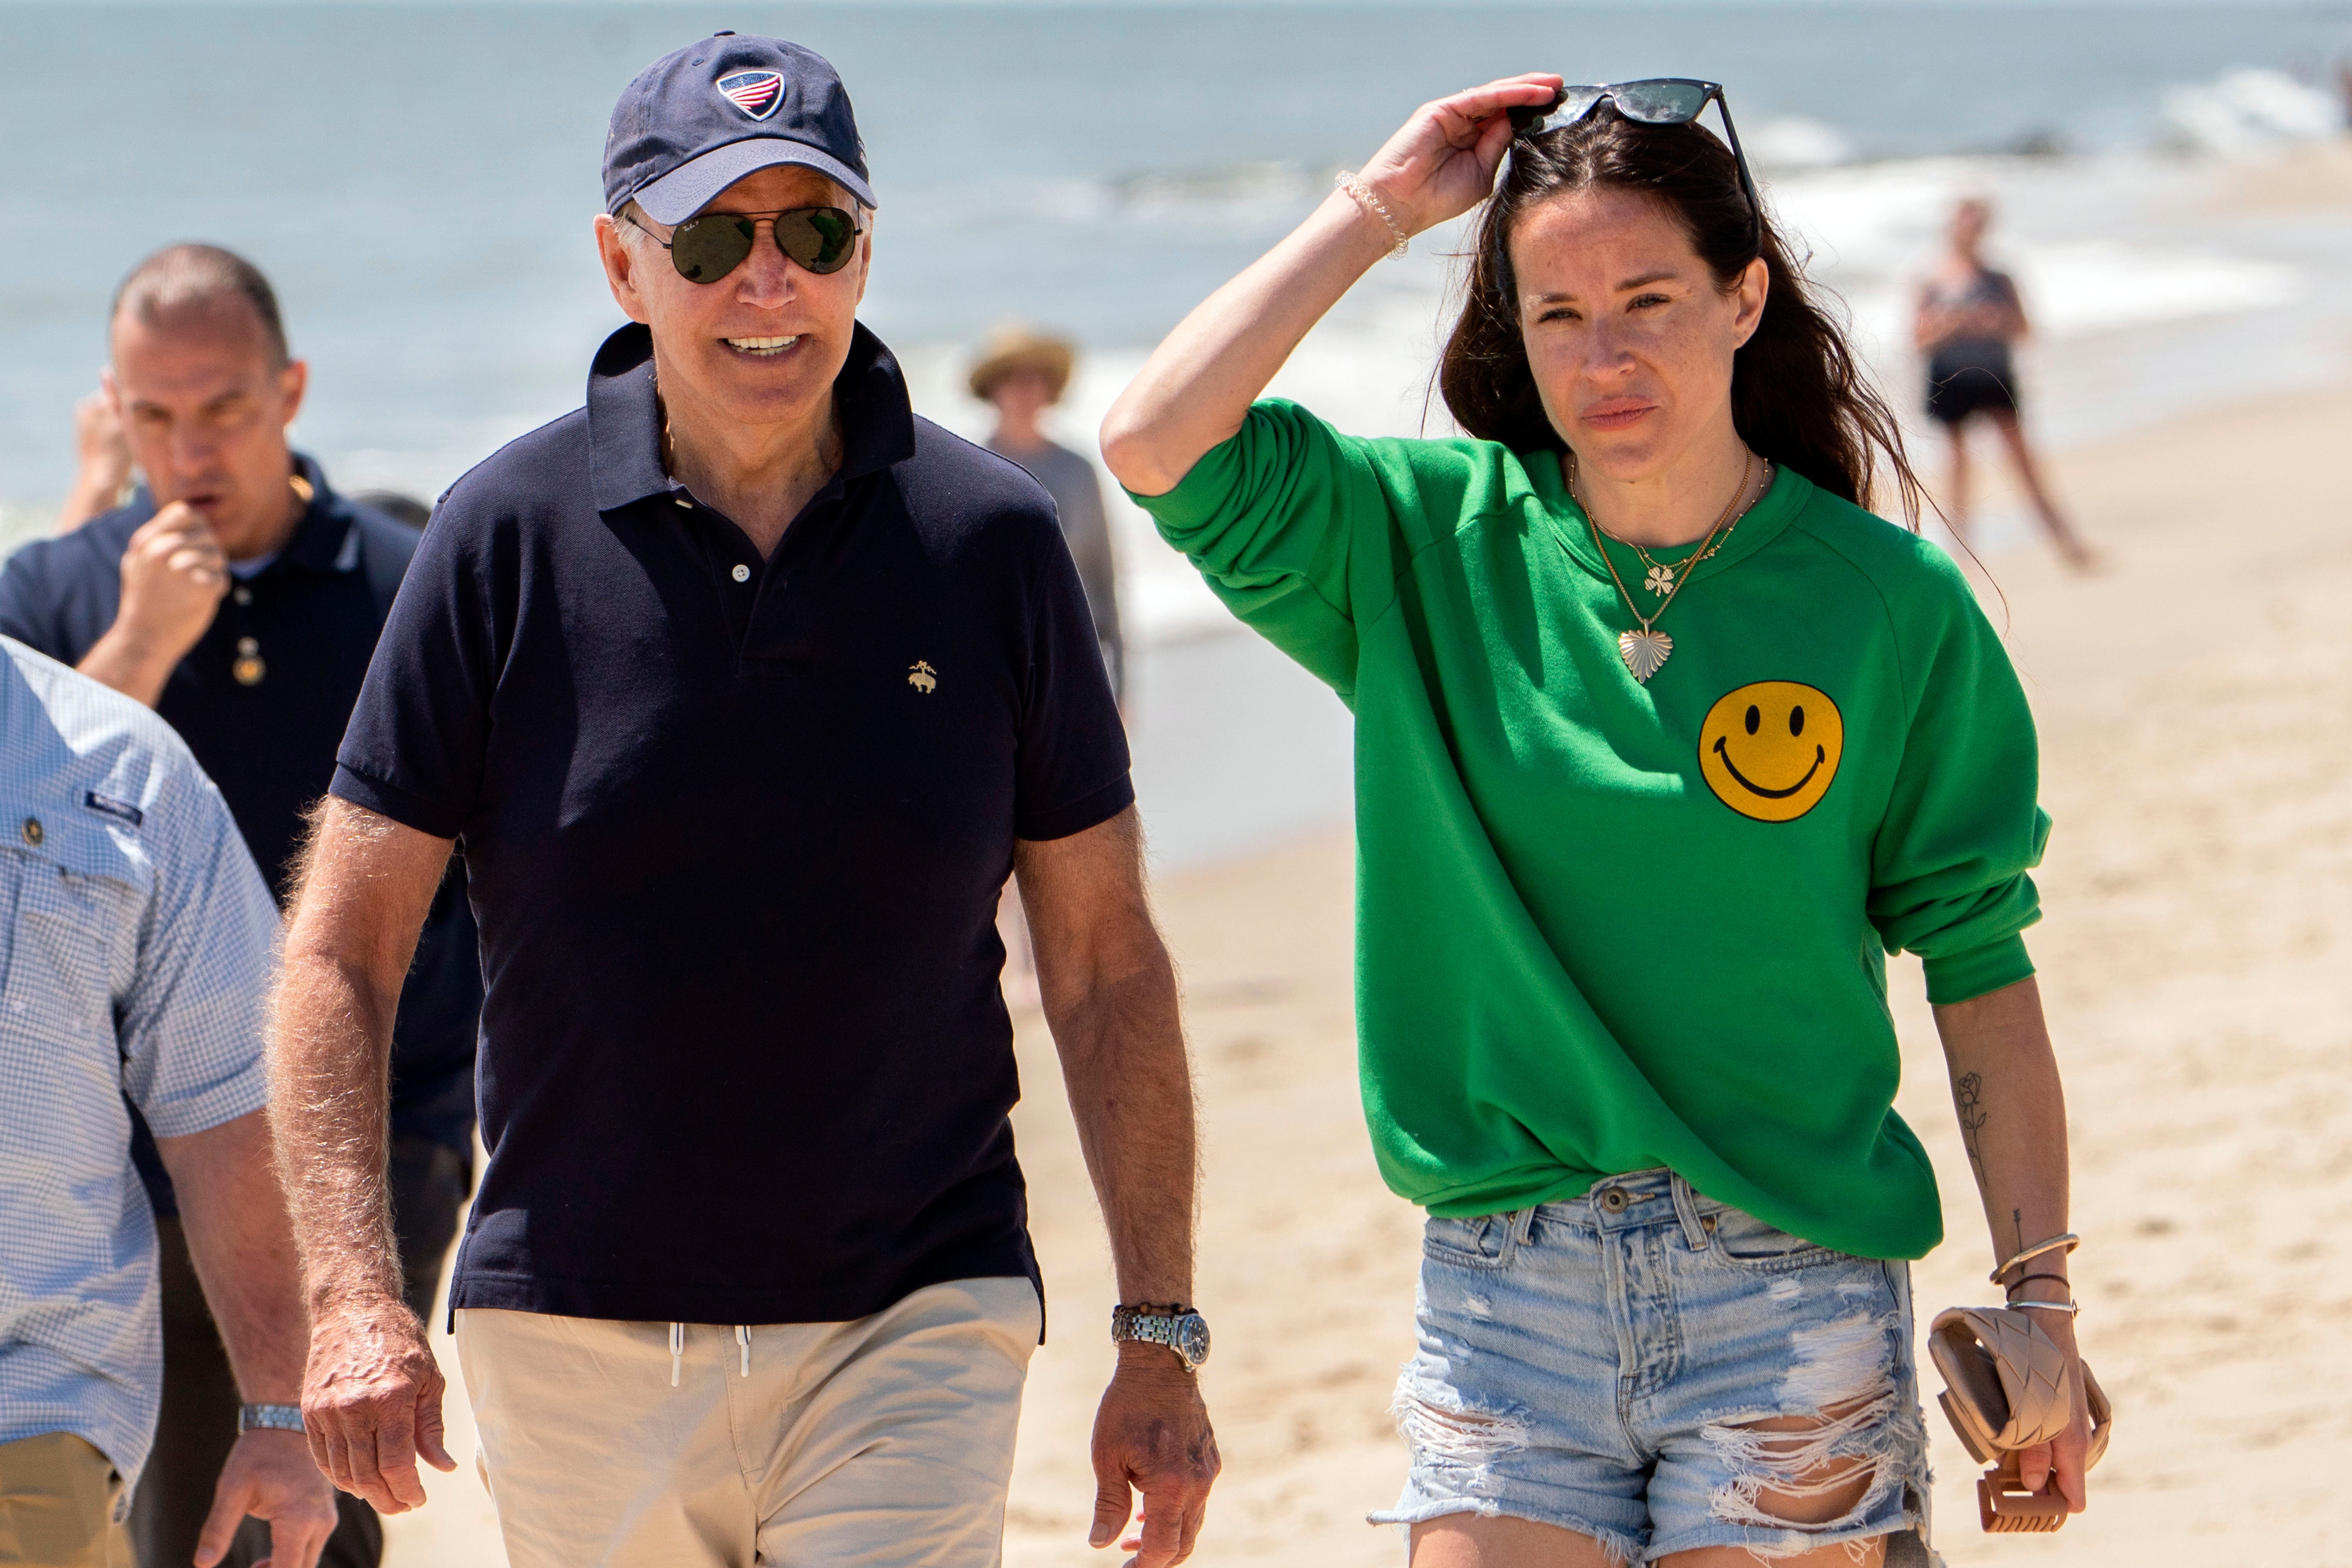 Joe Biden, with his daughter Ashley, has previously been seen shirtless while holidaying in Delaware